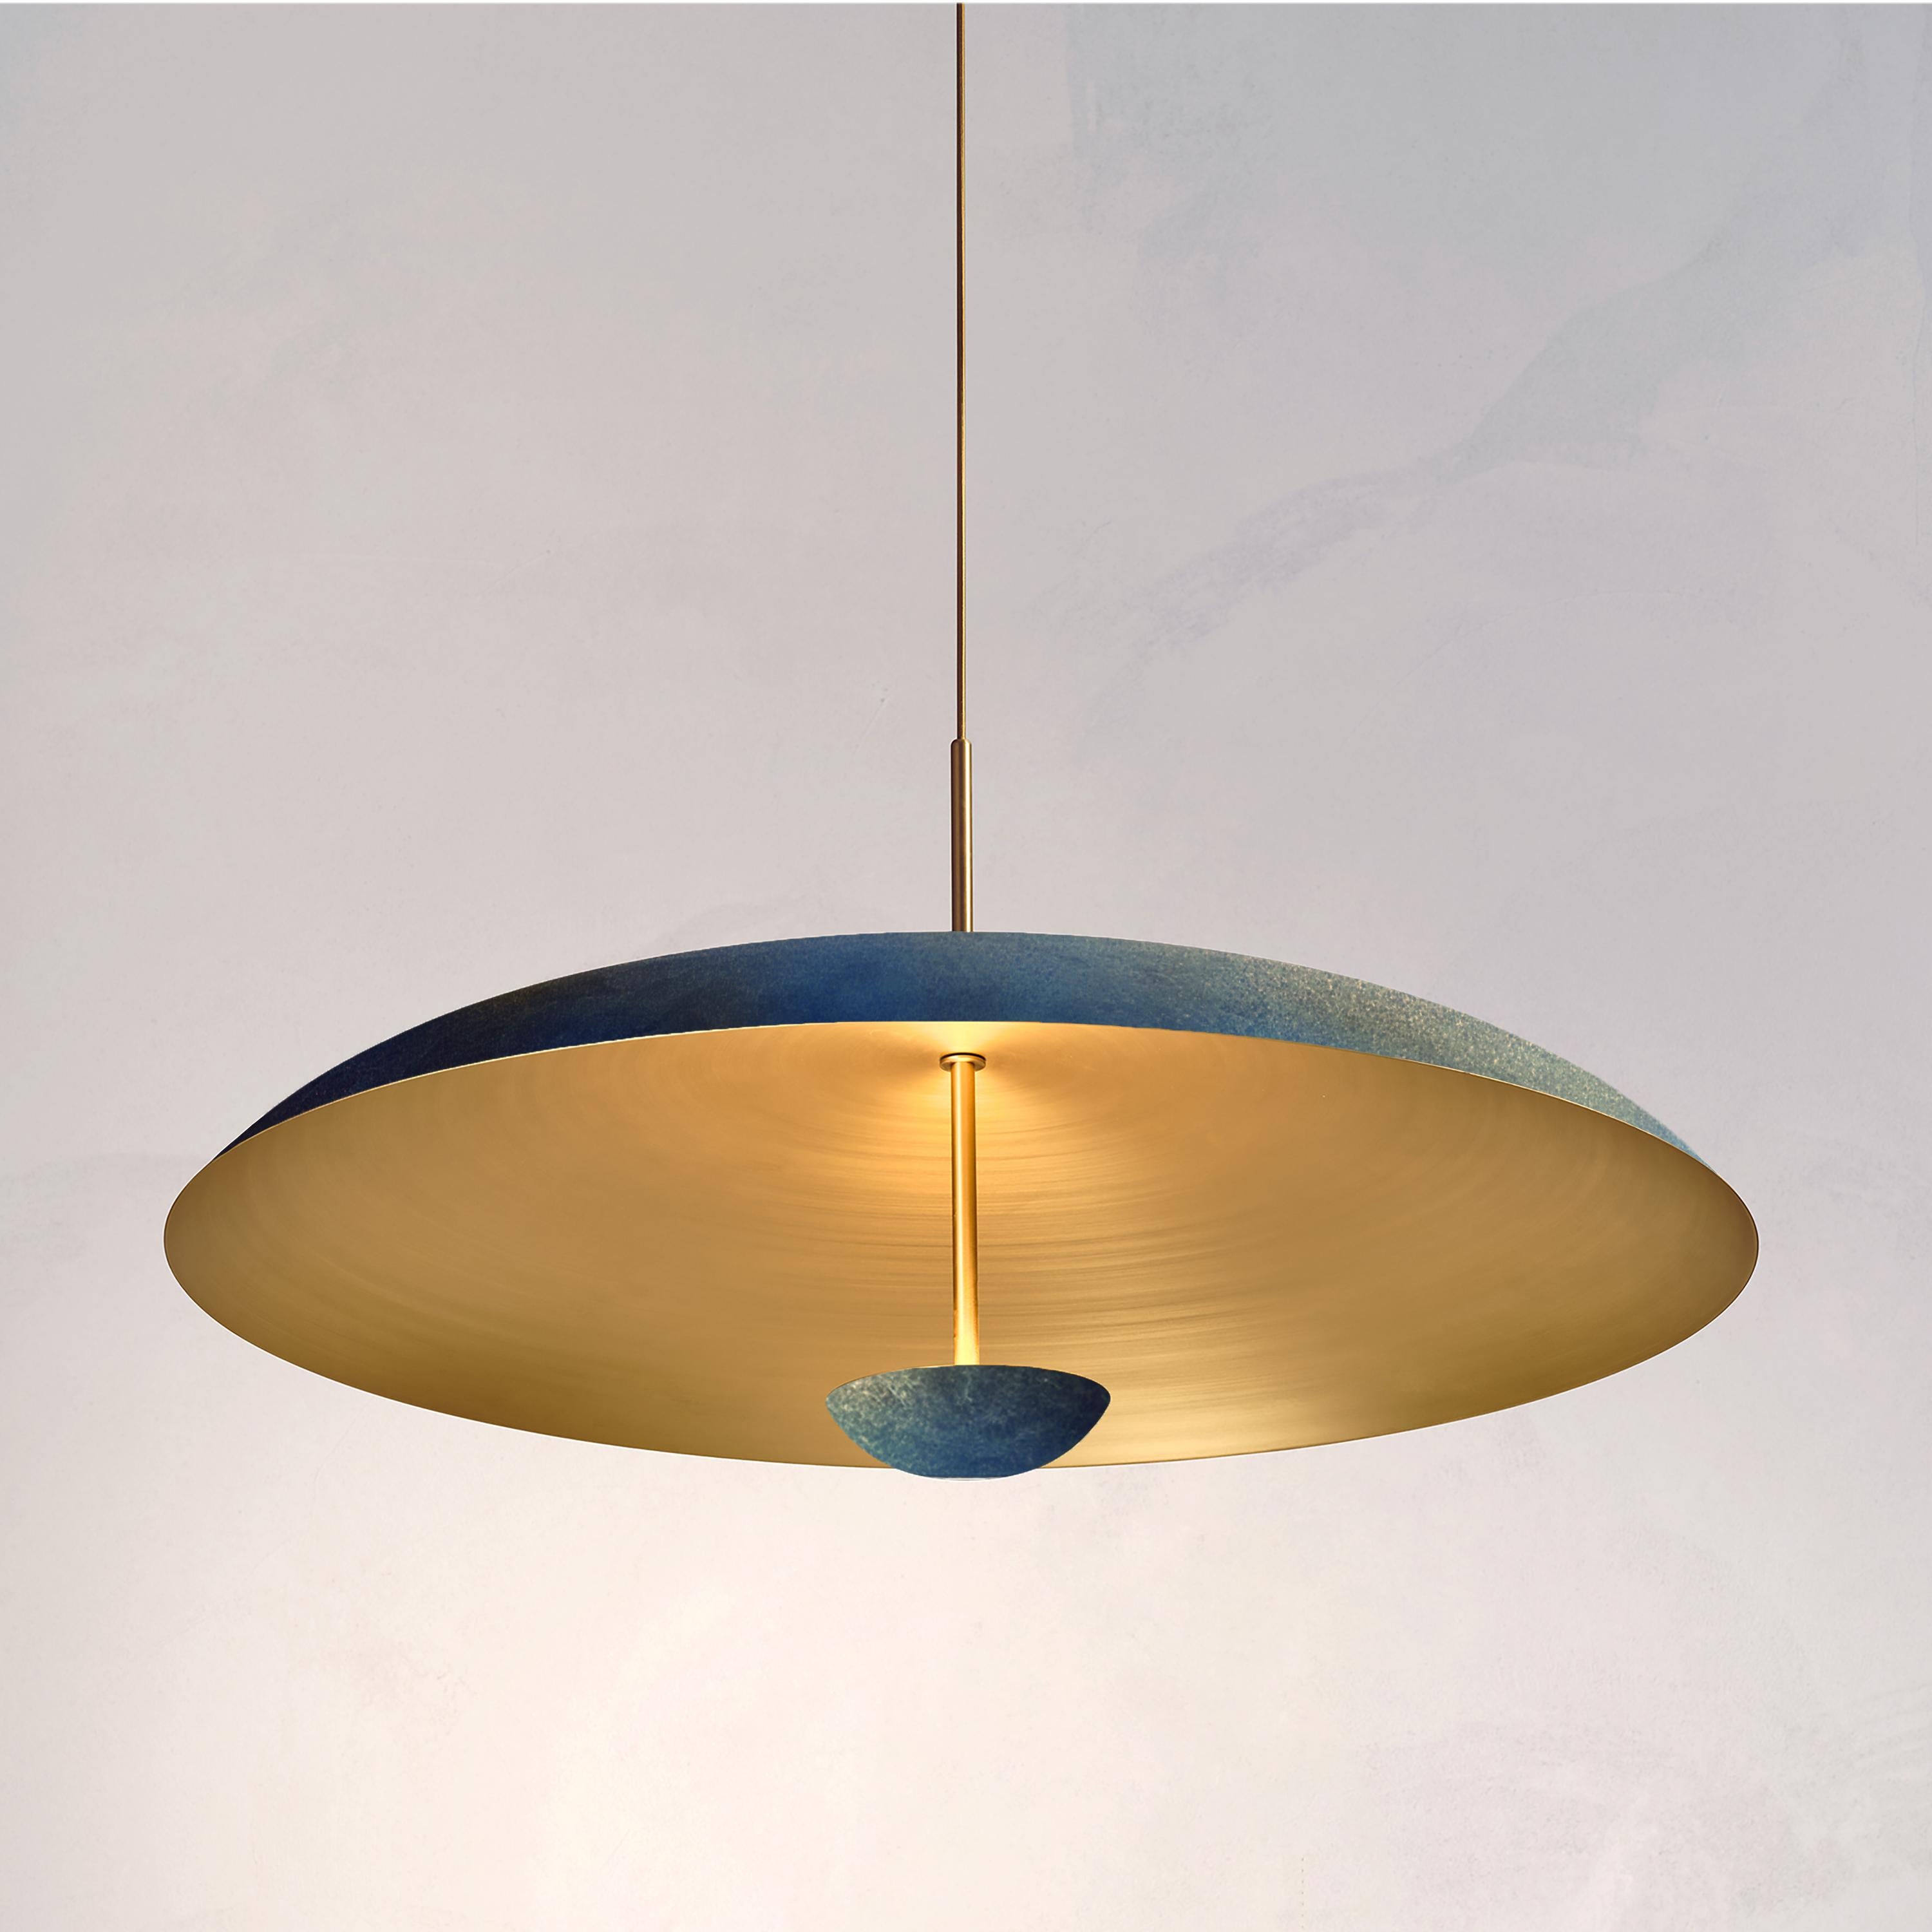 Two finely hand-spun brass plates make up this pendant light, finished in a custom 'Azure' patina to create this unique appearance. The light is projected into the shade and reflects out, illuminating without creating a glare.
 
This light fixture